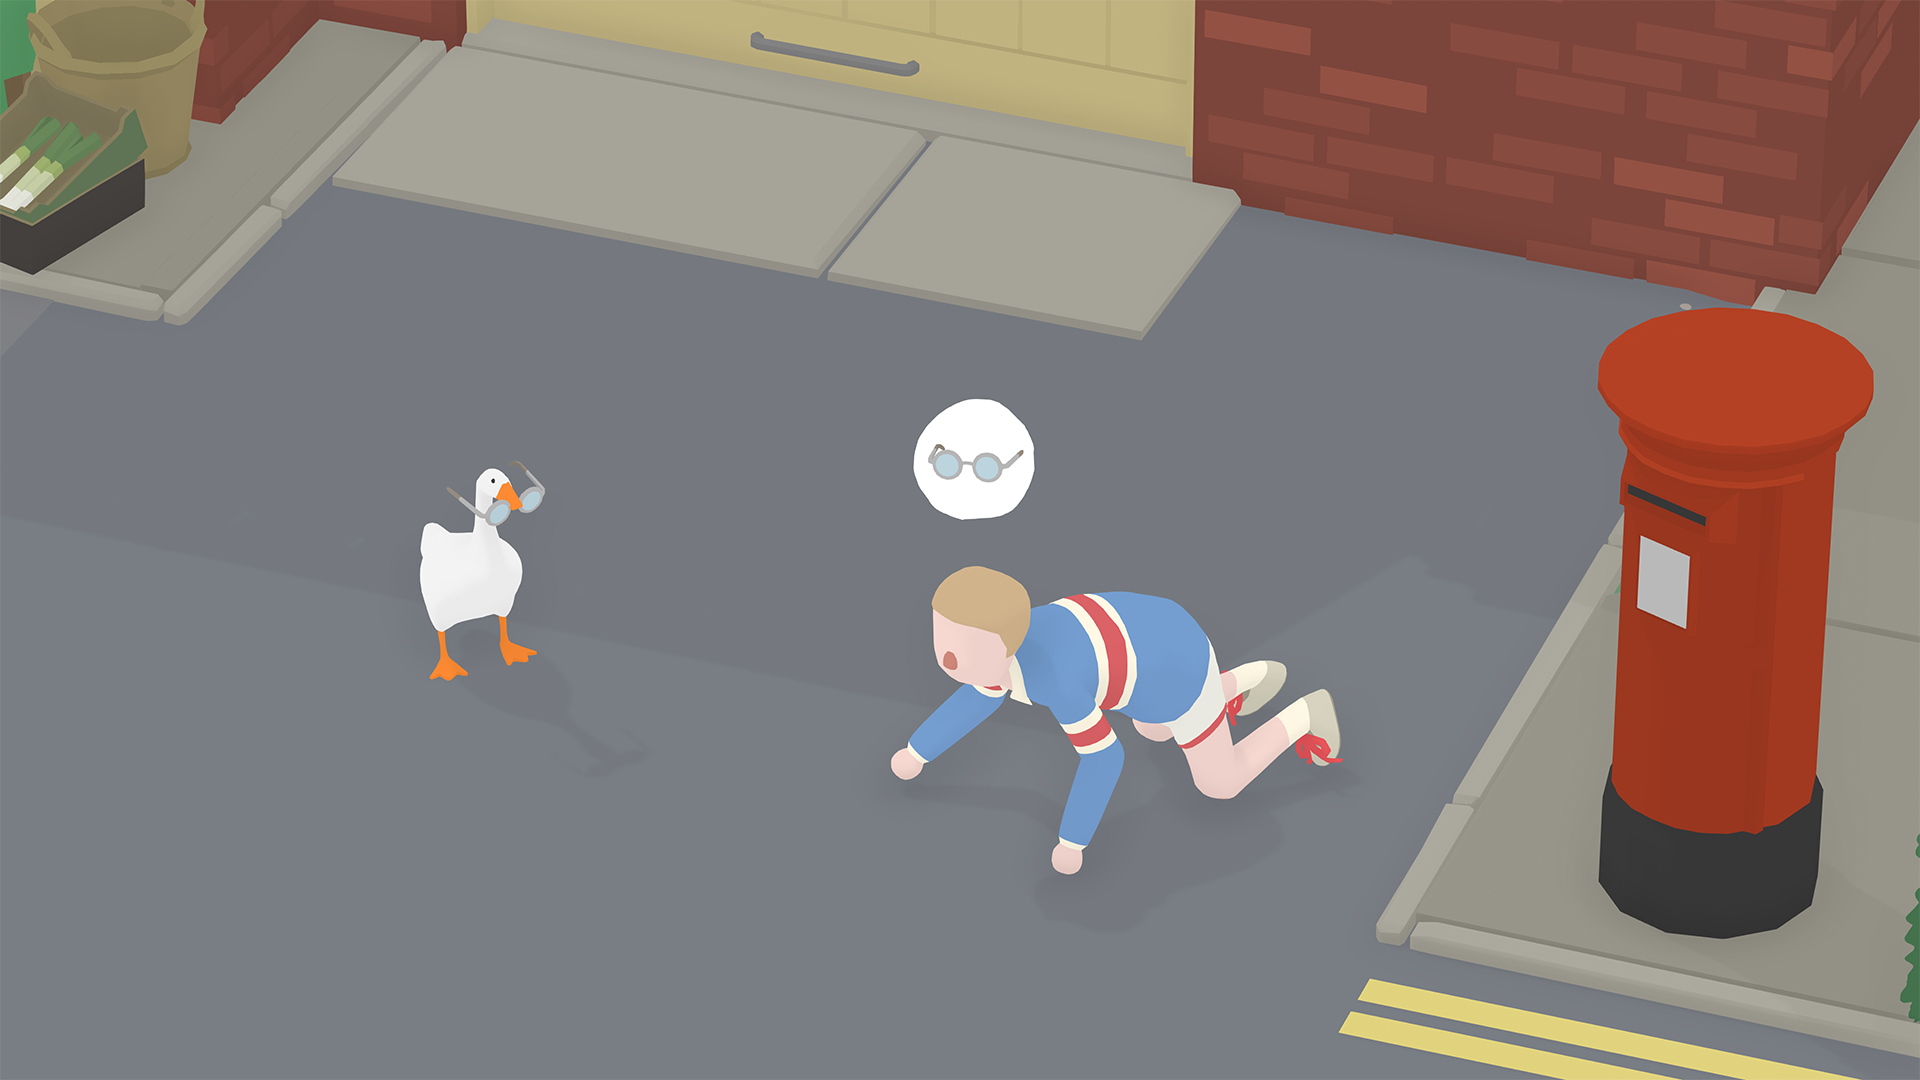 Untitled Goose Game: channeling the troll in you